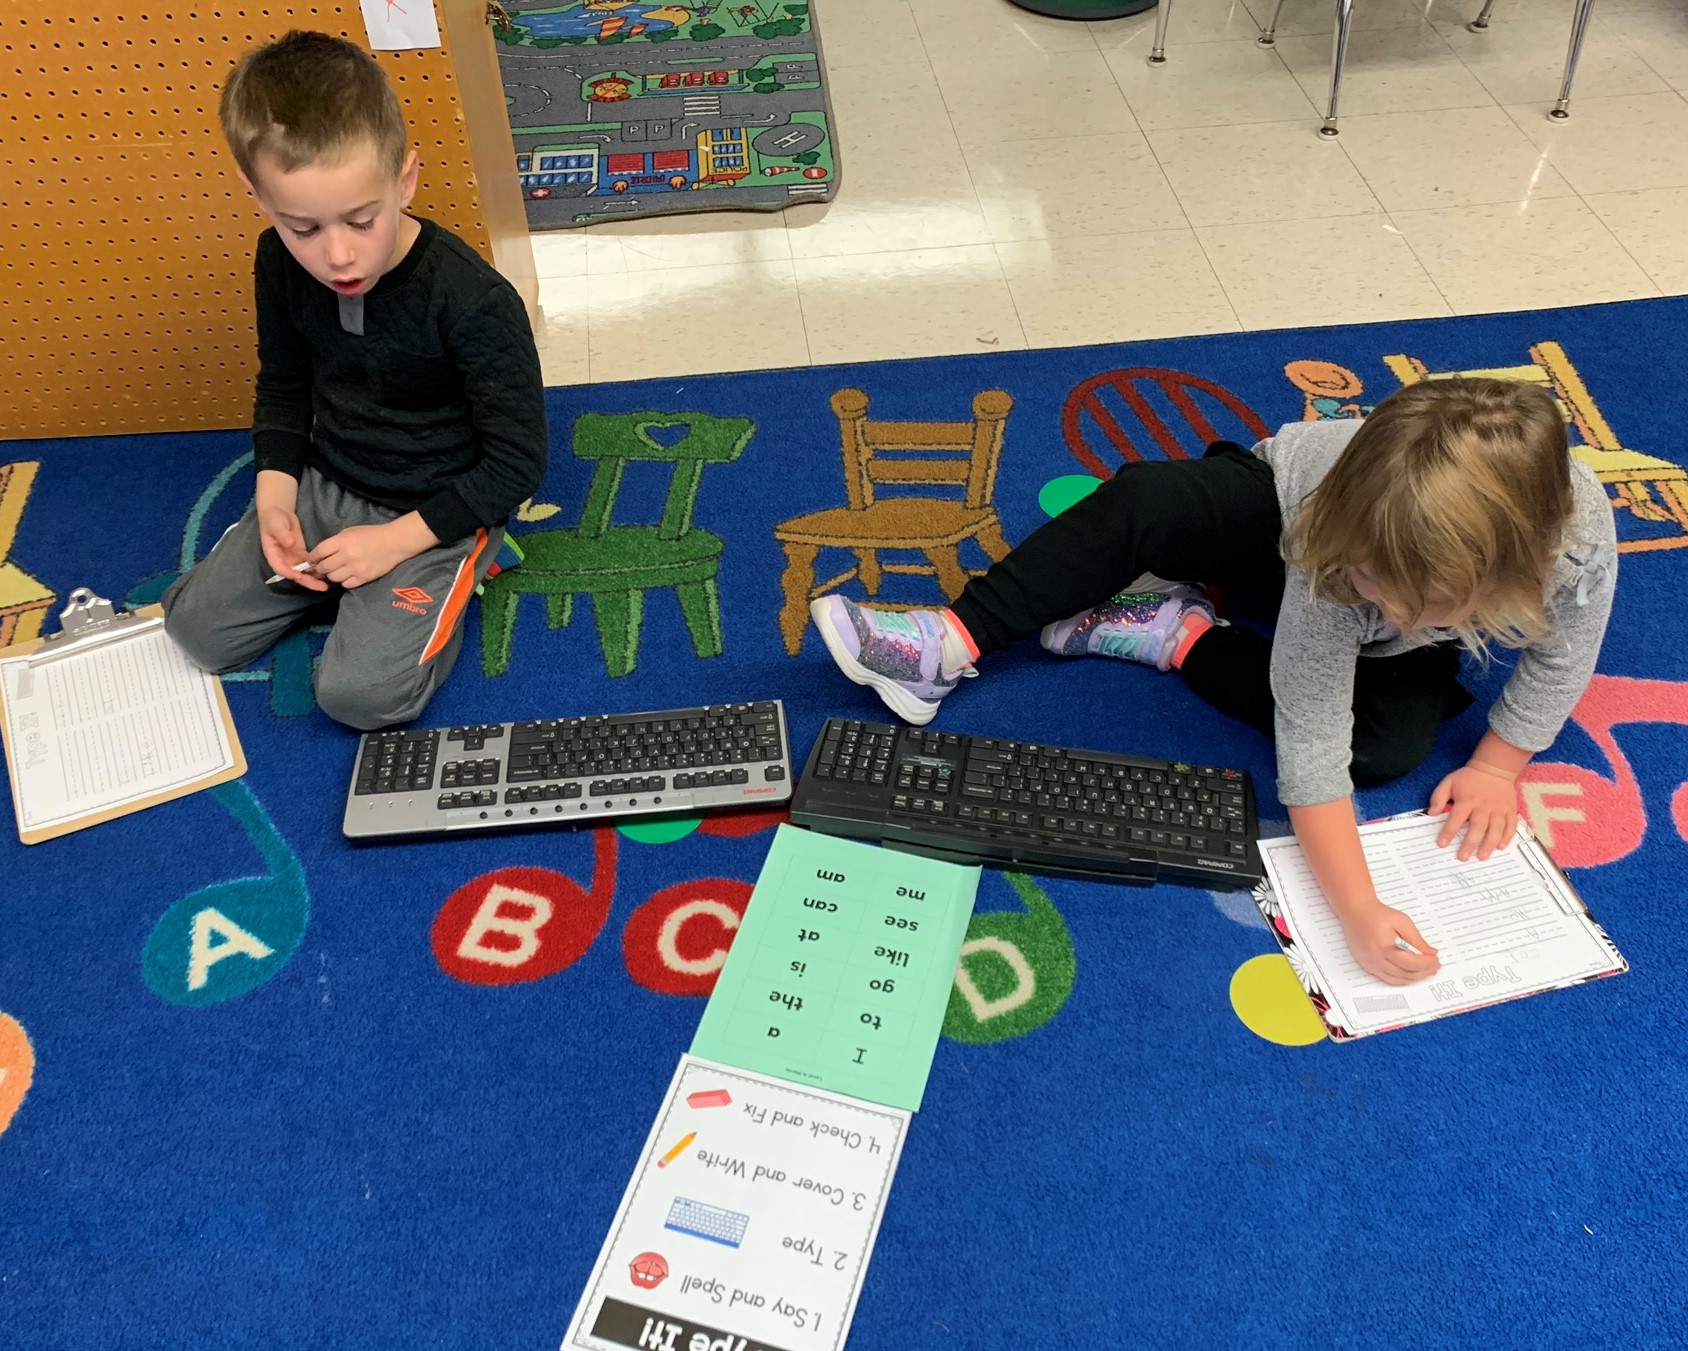 Two students work on writing while sitting on the floor.